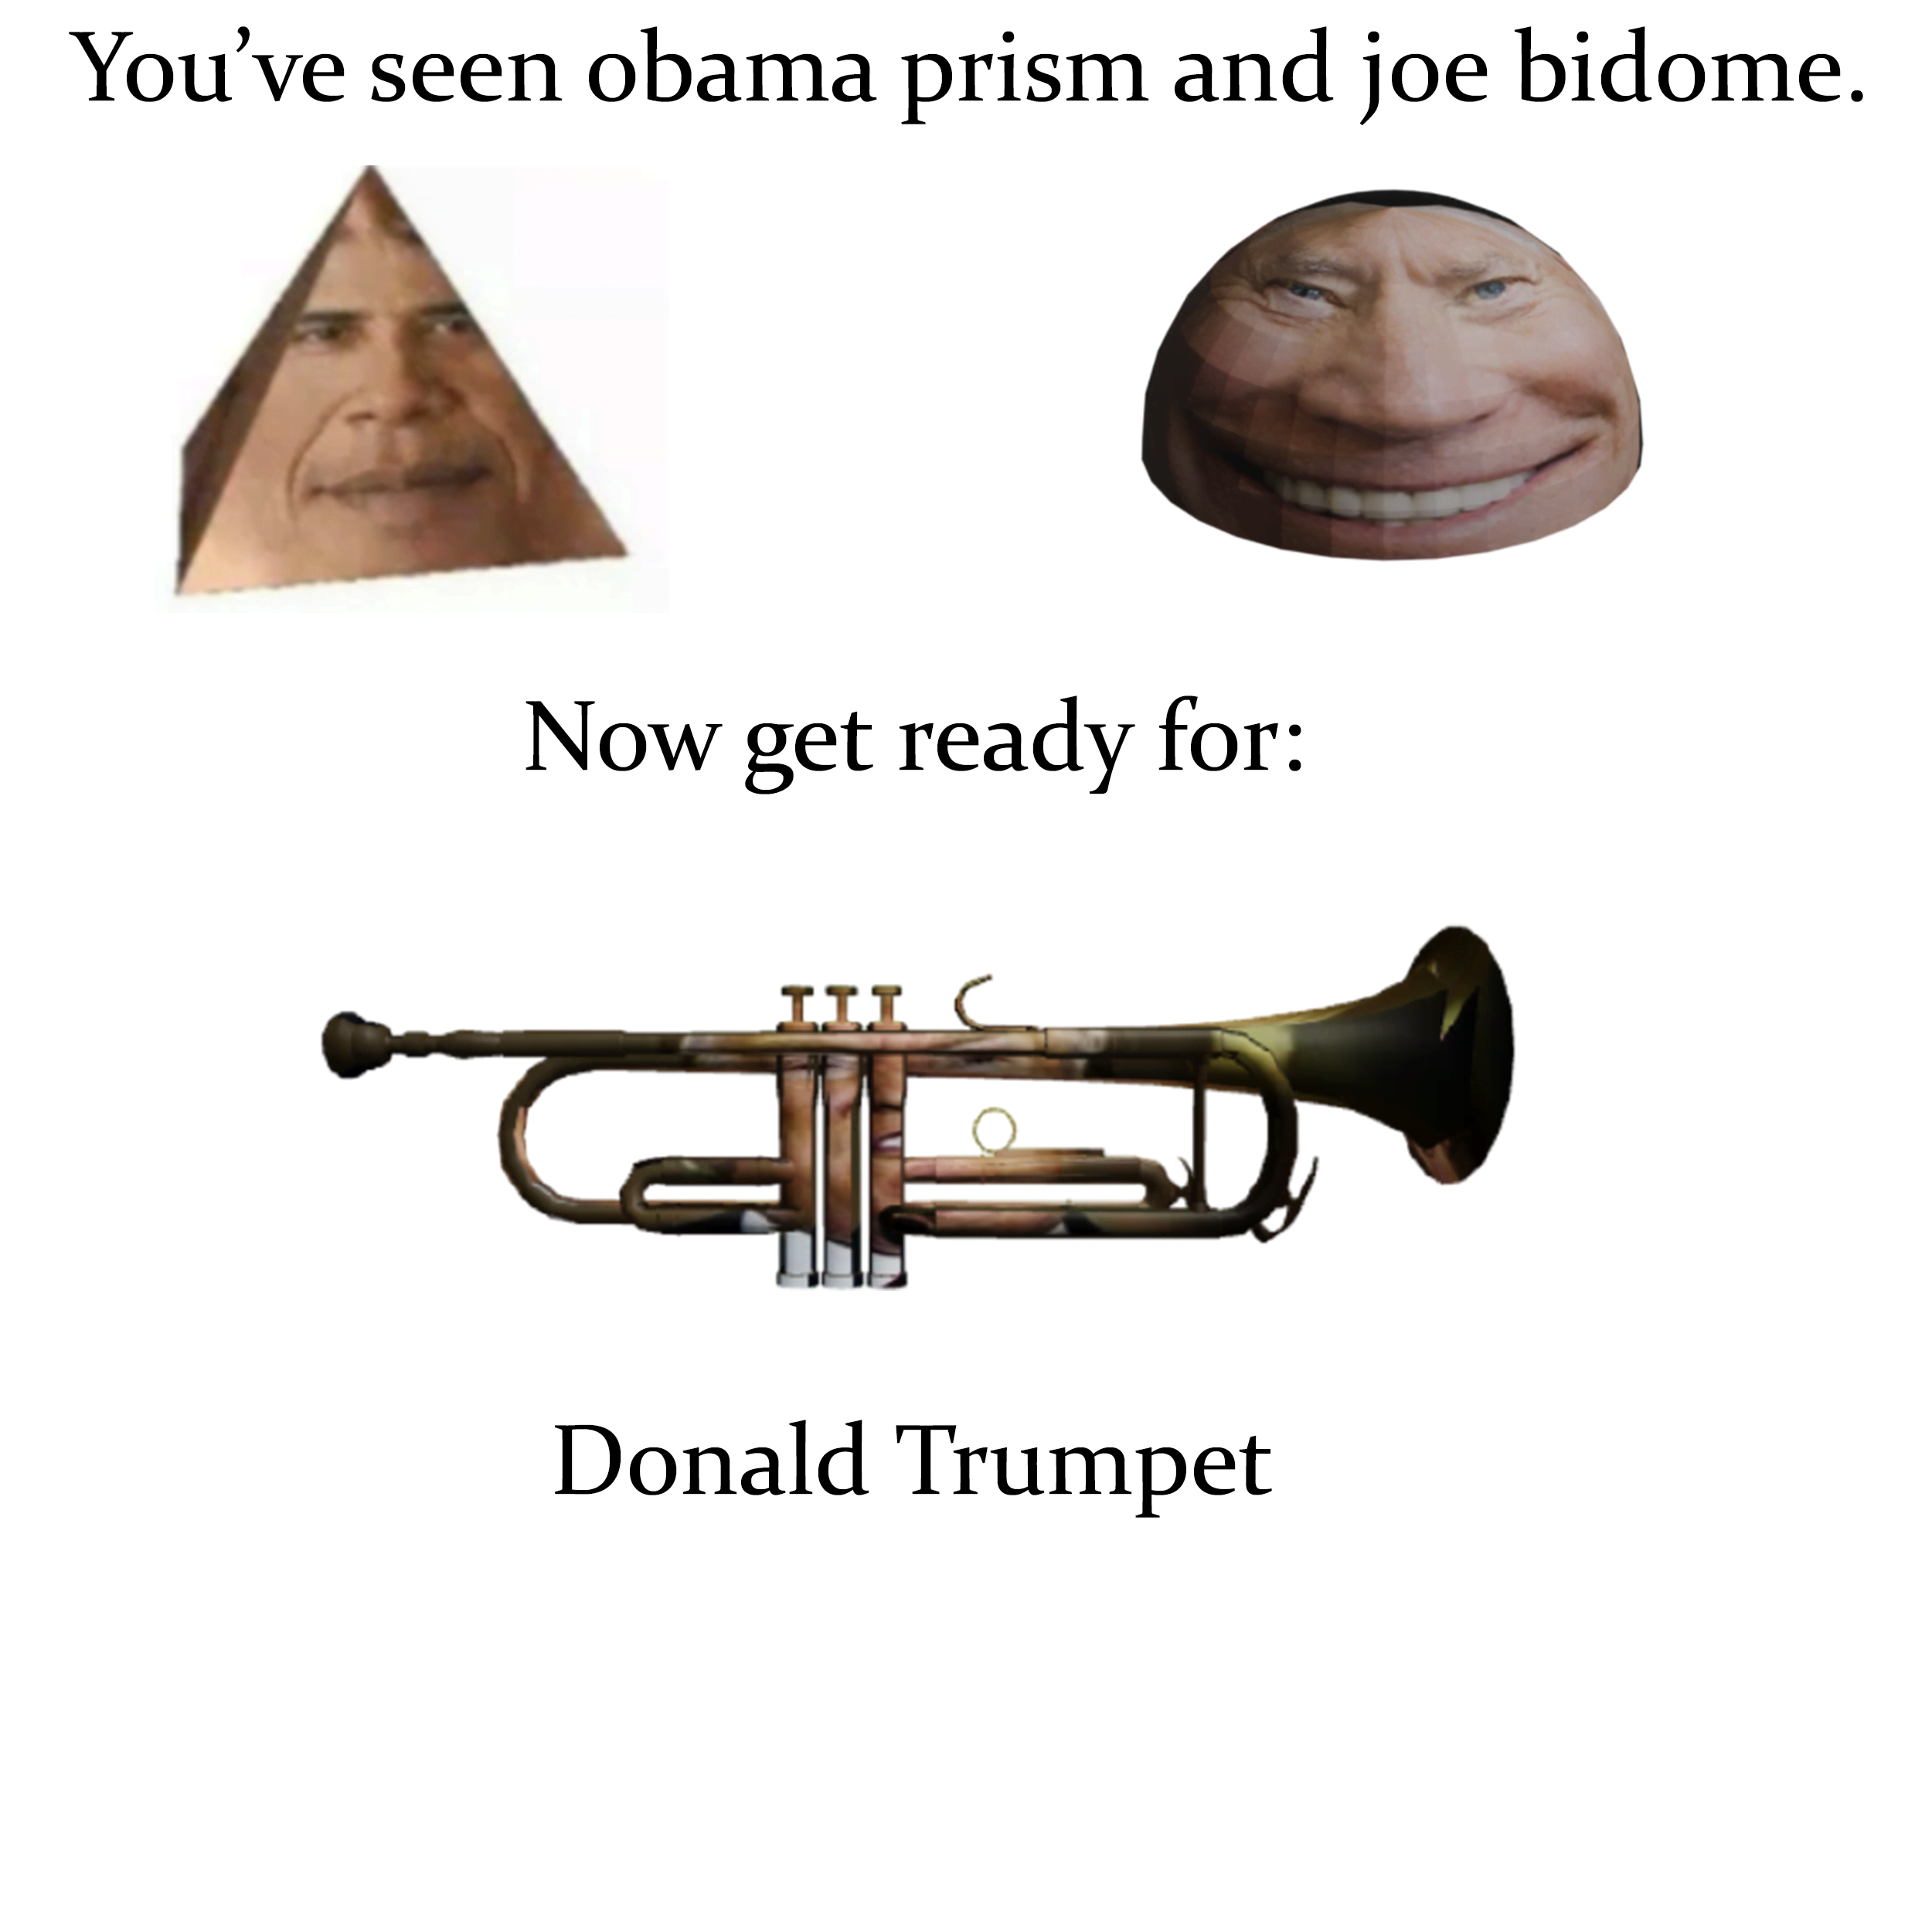 trumpet - You've seen obama prism and joe bidome. Now get ready for Iii c Donald Trumpet